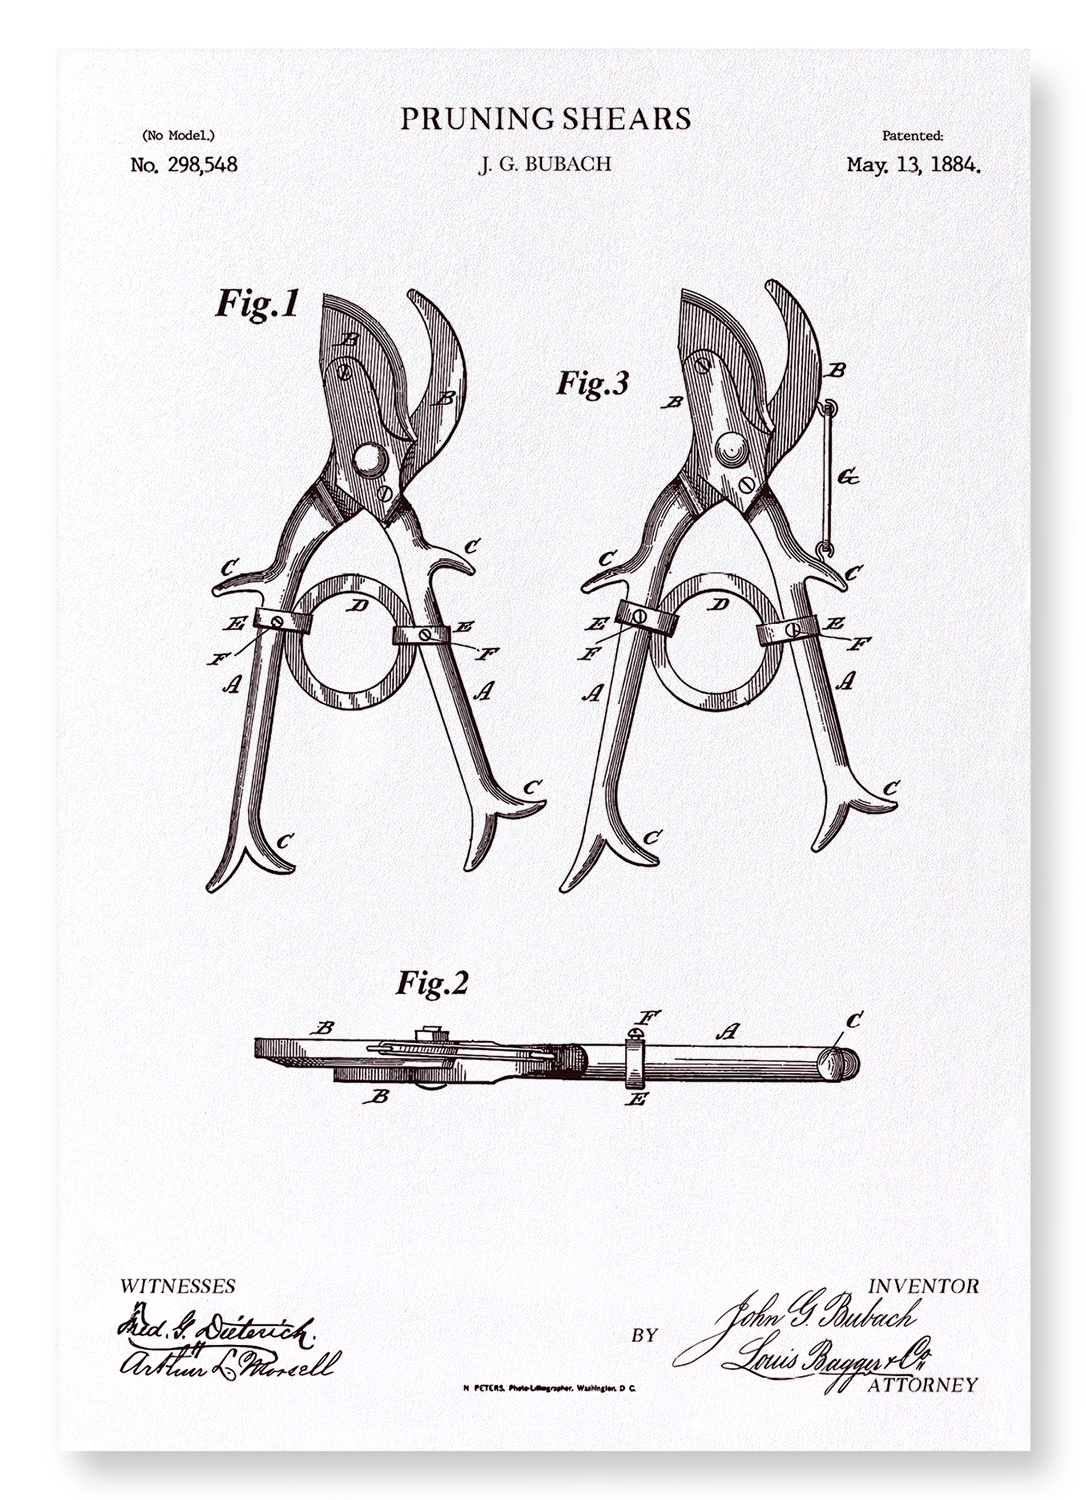 PATENT OF PRUNING SHEARS (1884)